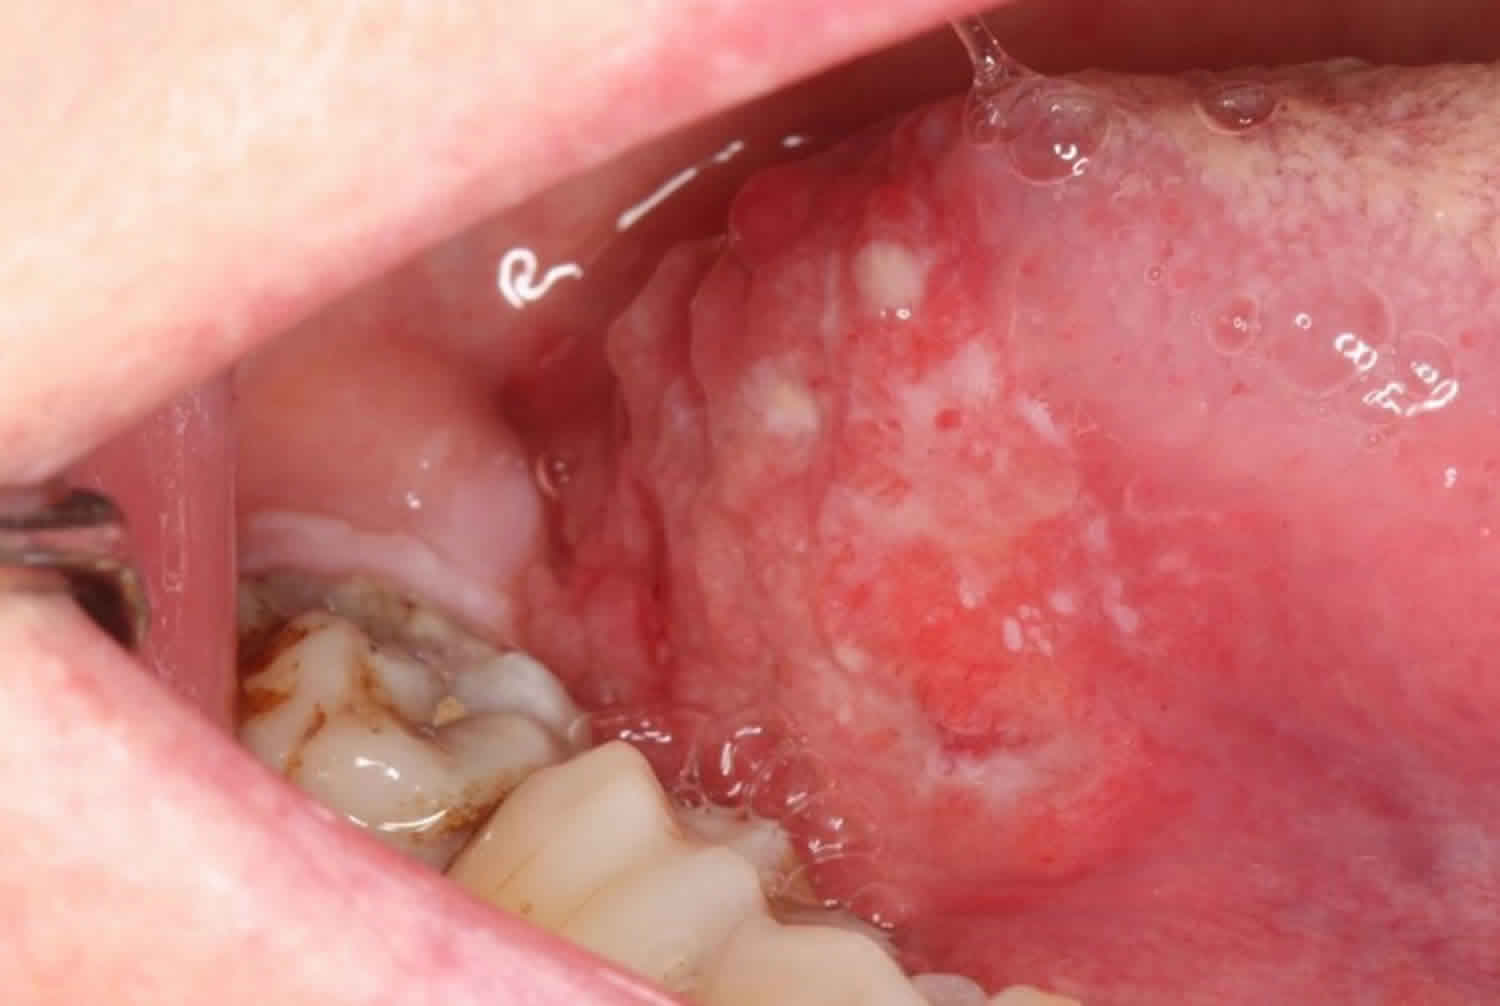 Causes, symptoms and treatment of mouth cancer